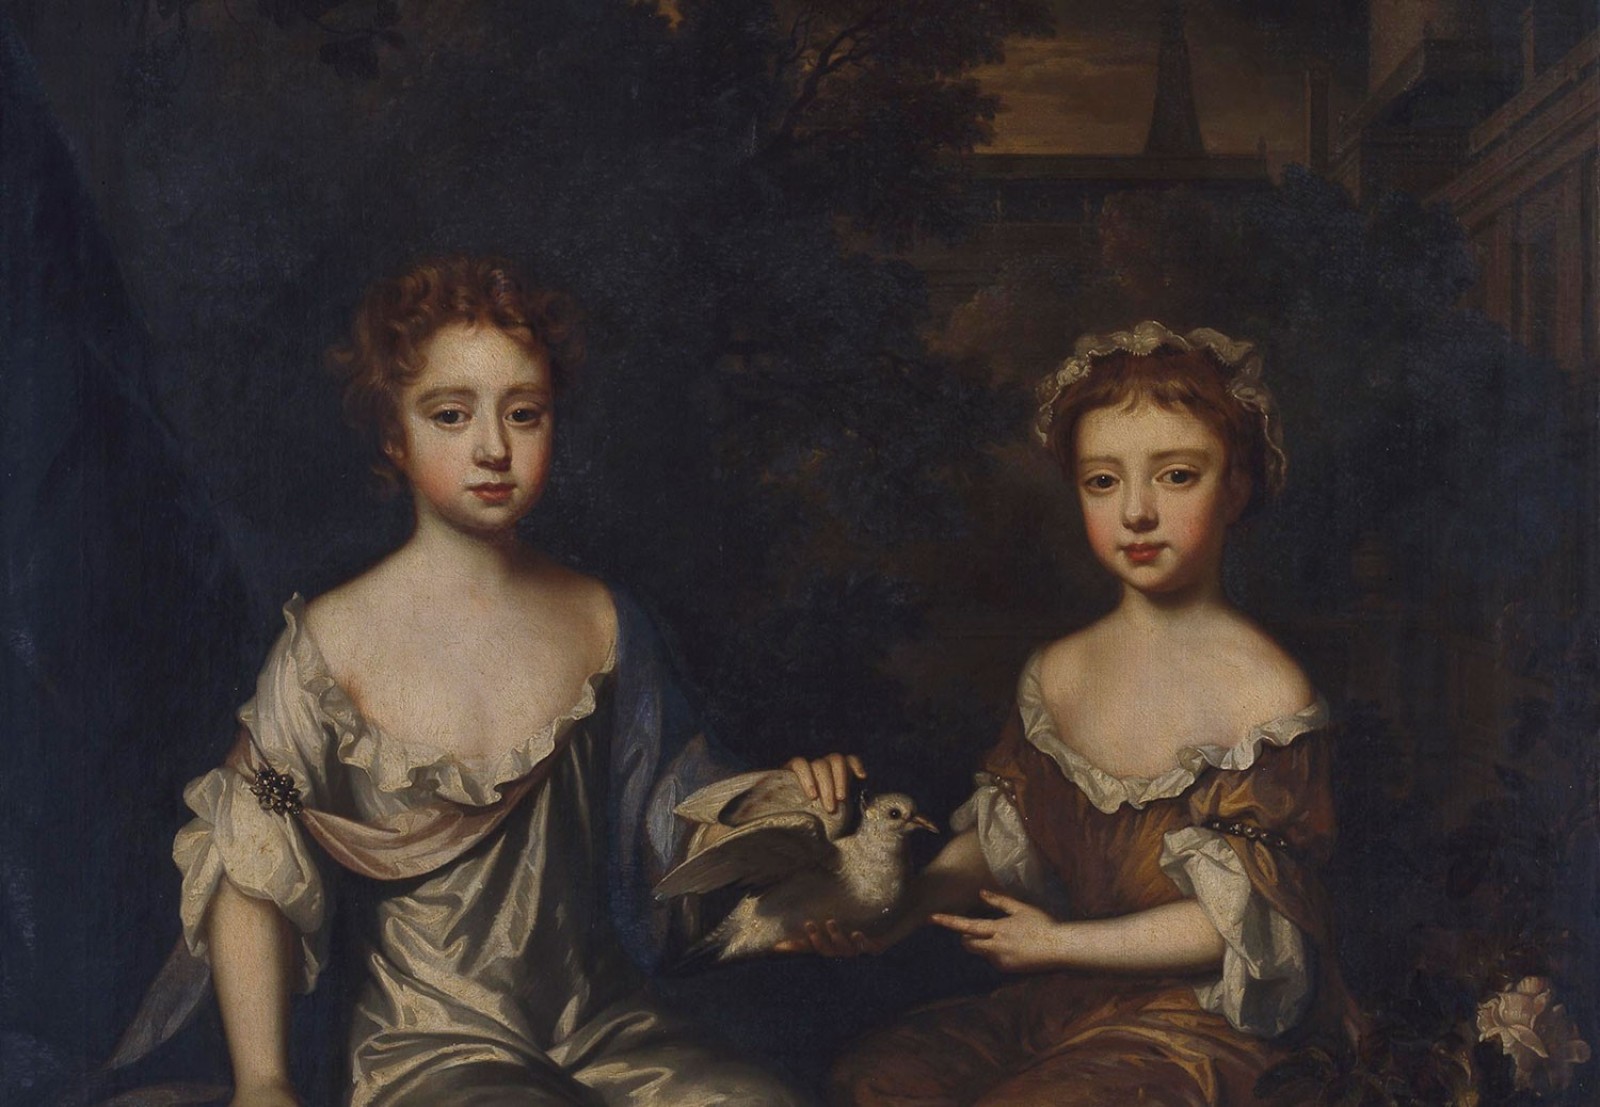 Willem Wissing’s “Portrait of Henrietta and Mary Hyde” in the Tate’s British Baroque, Power and Illusion